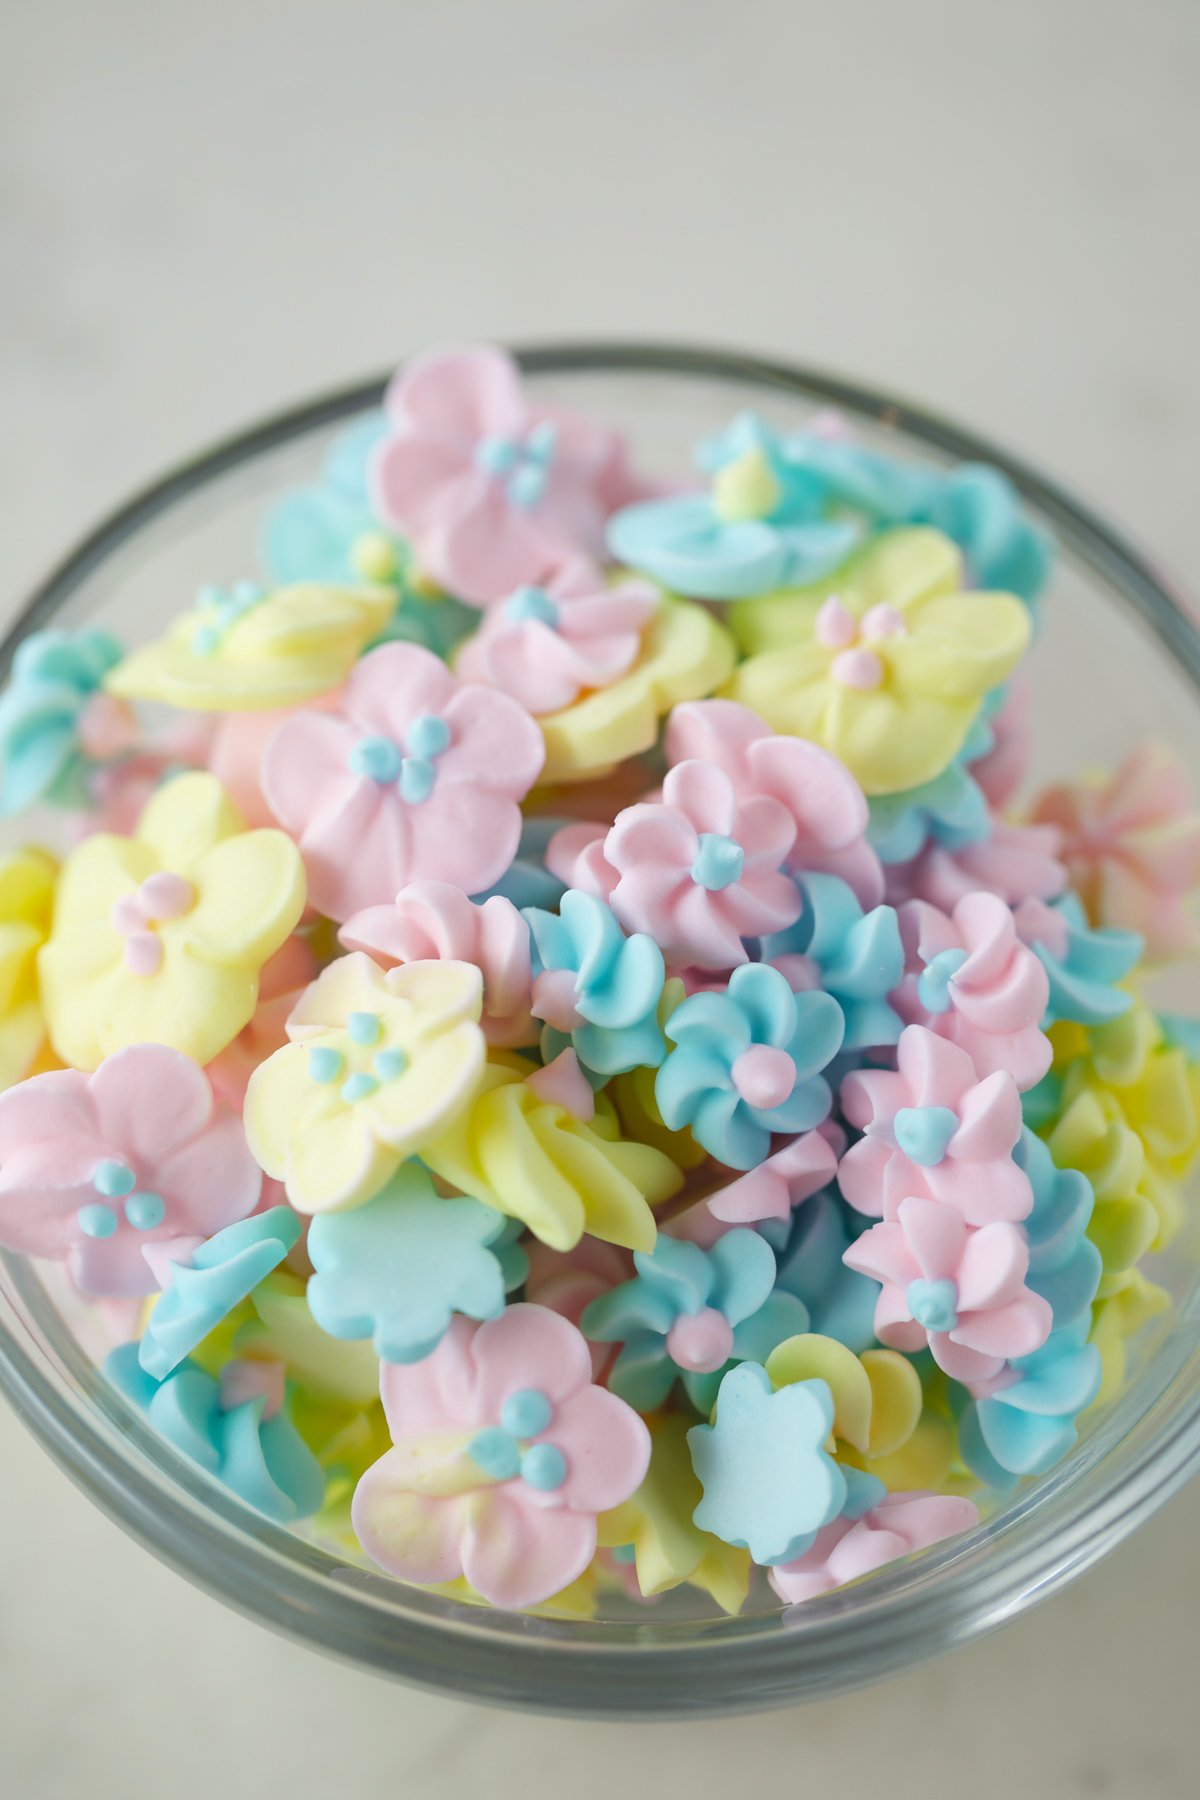 Royal icing flowers in a glass bowl.